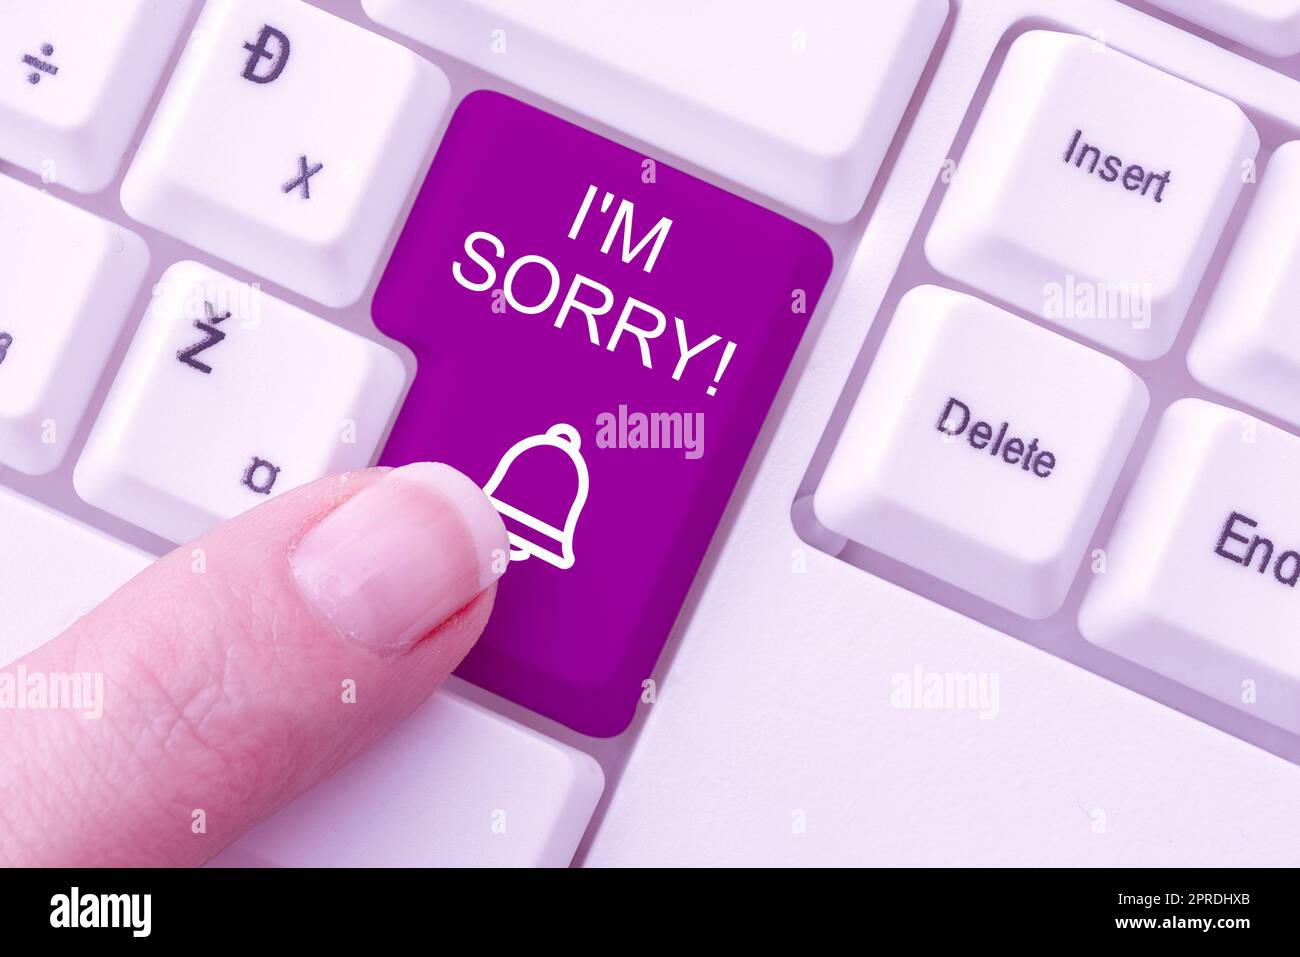 Writing displaying text I Am Sorry. Internet Concept Toask for forgiveness to someone you unintensionaly hurt -48920 Stock Photo